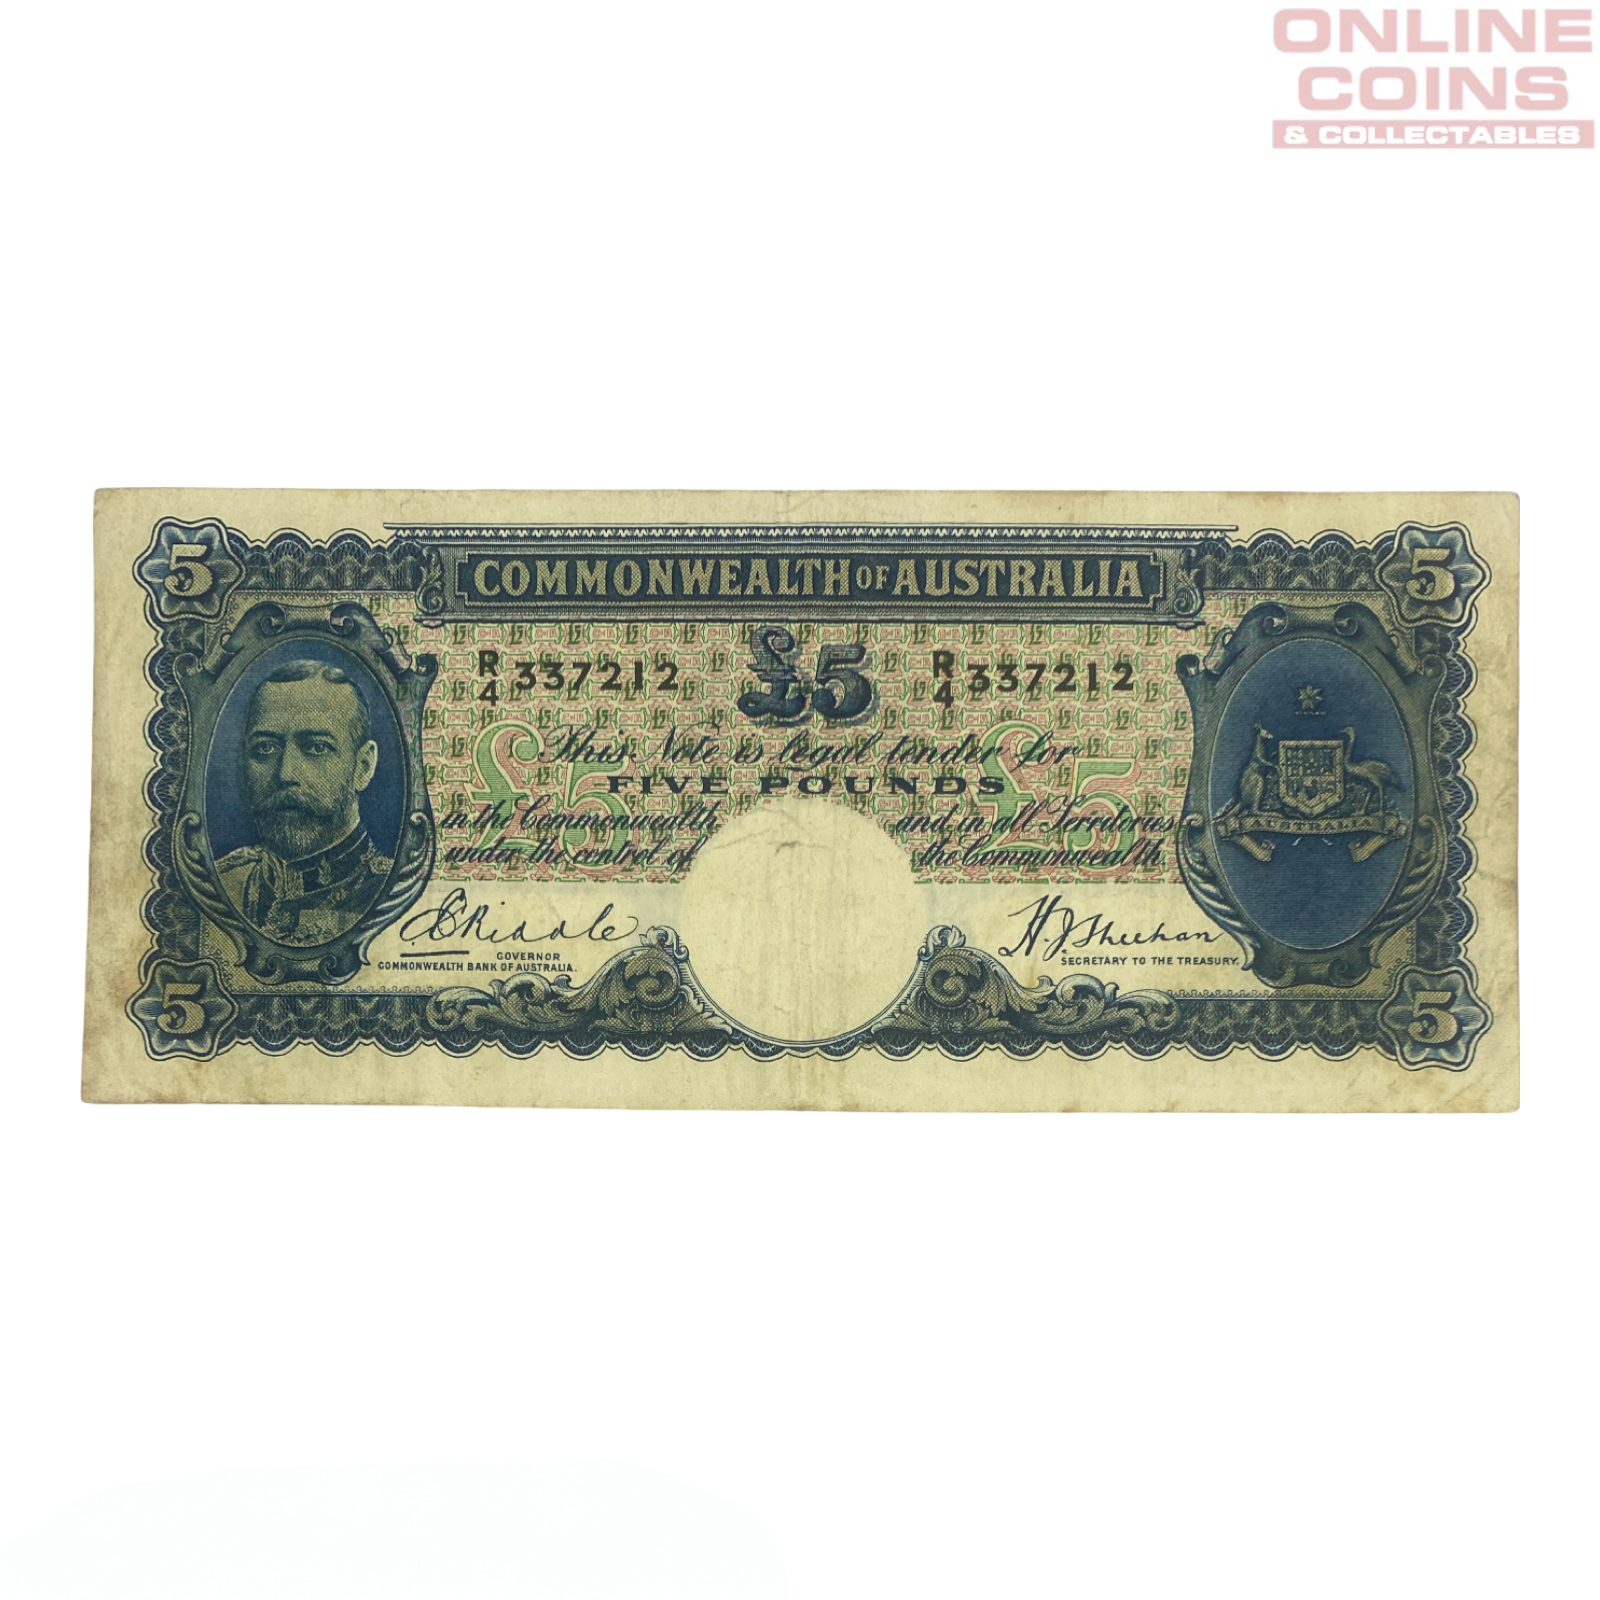 1933 Riddle Sheehan Five Pound Note - Very Good